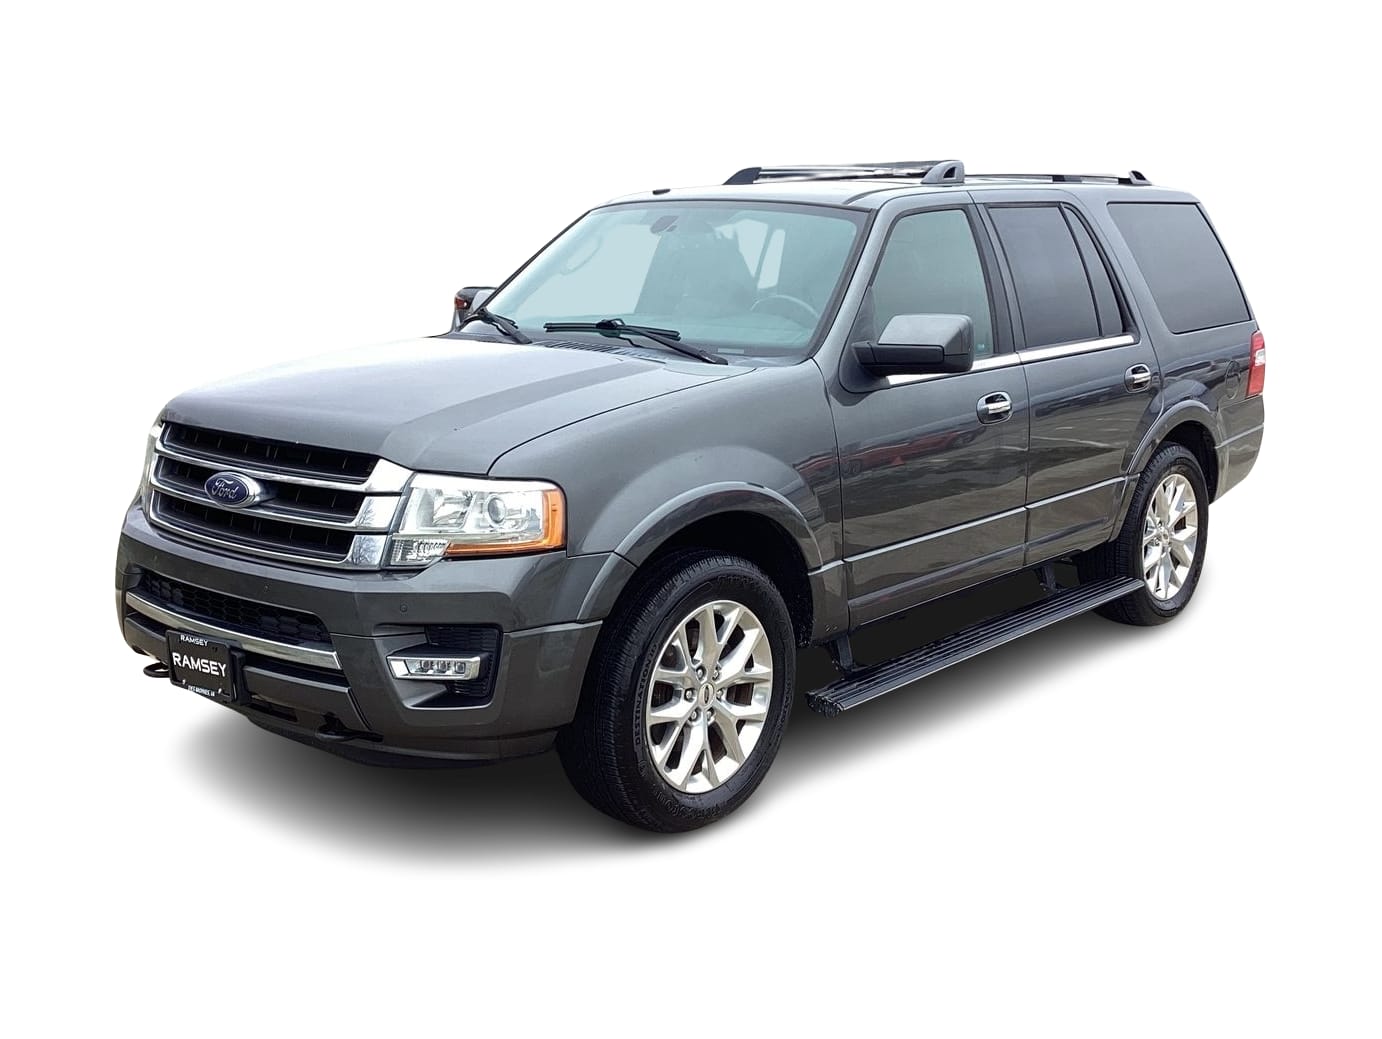 2016 Ford Expedition Limited Hero Image